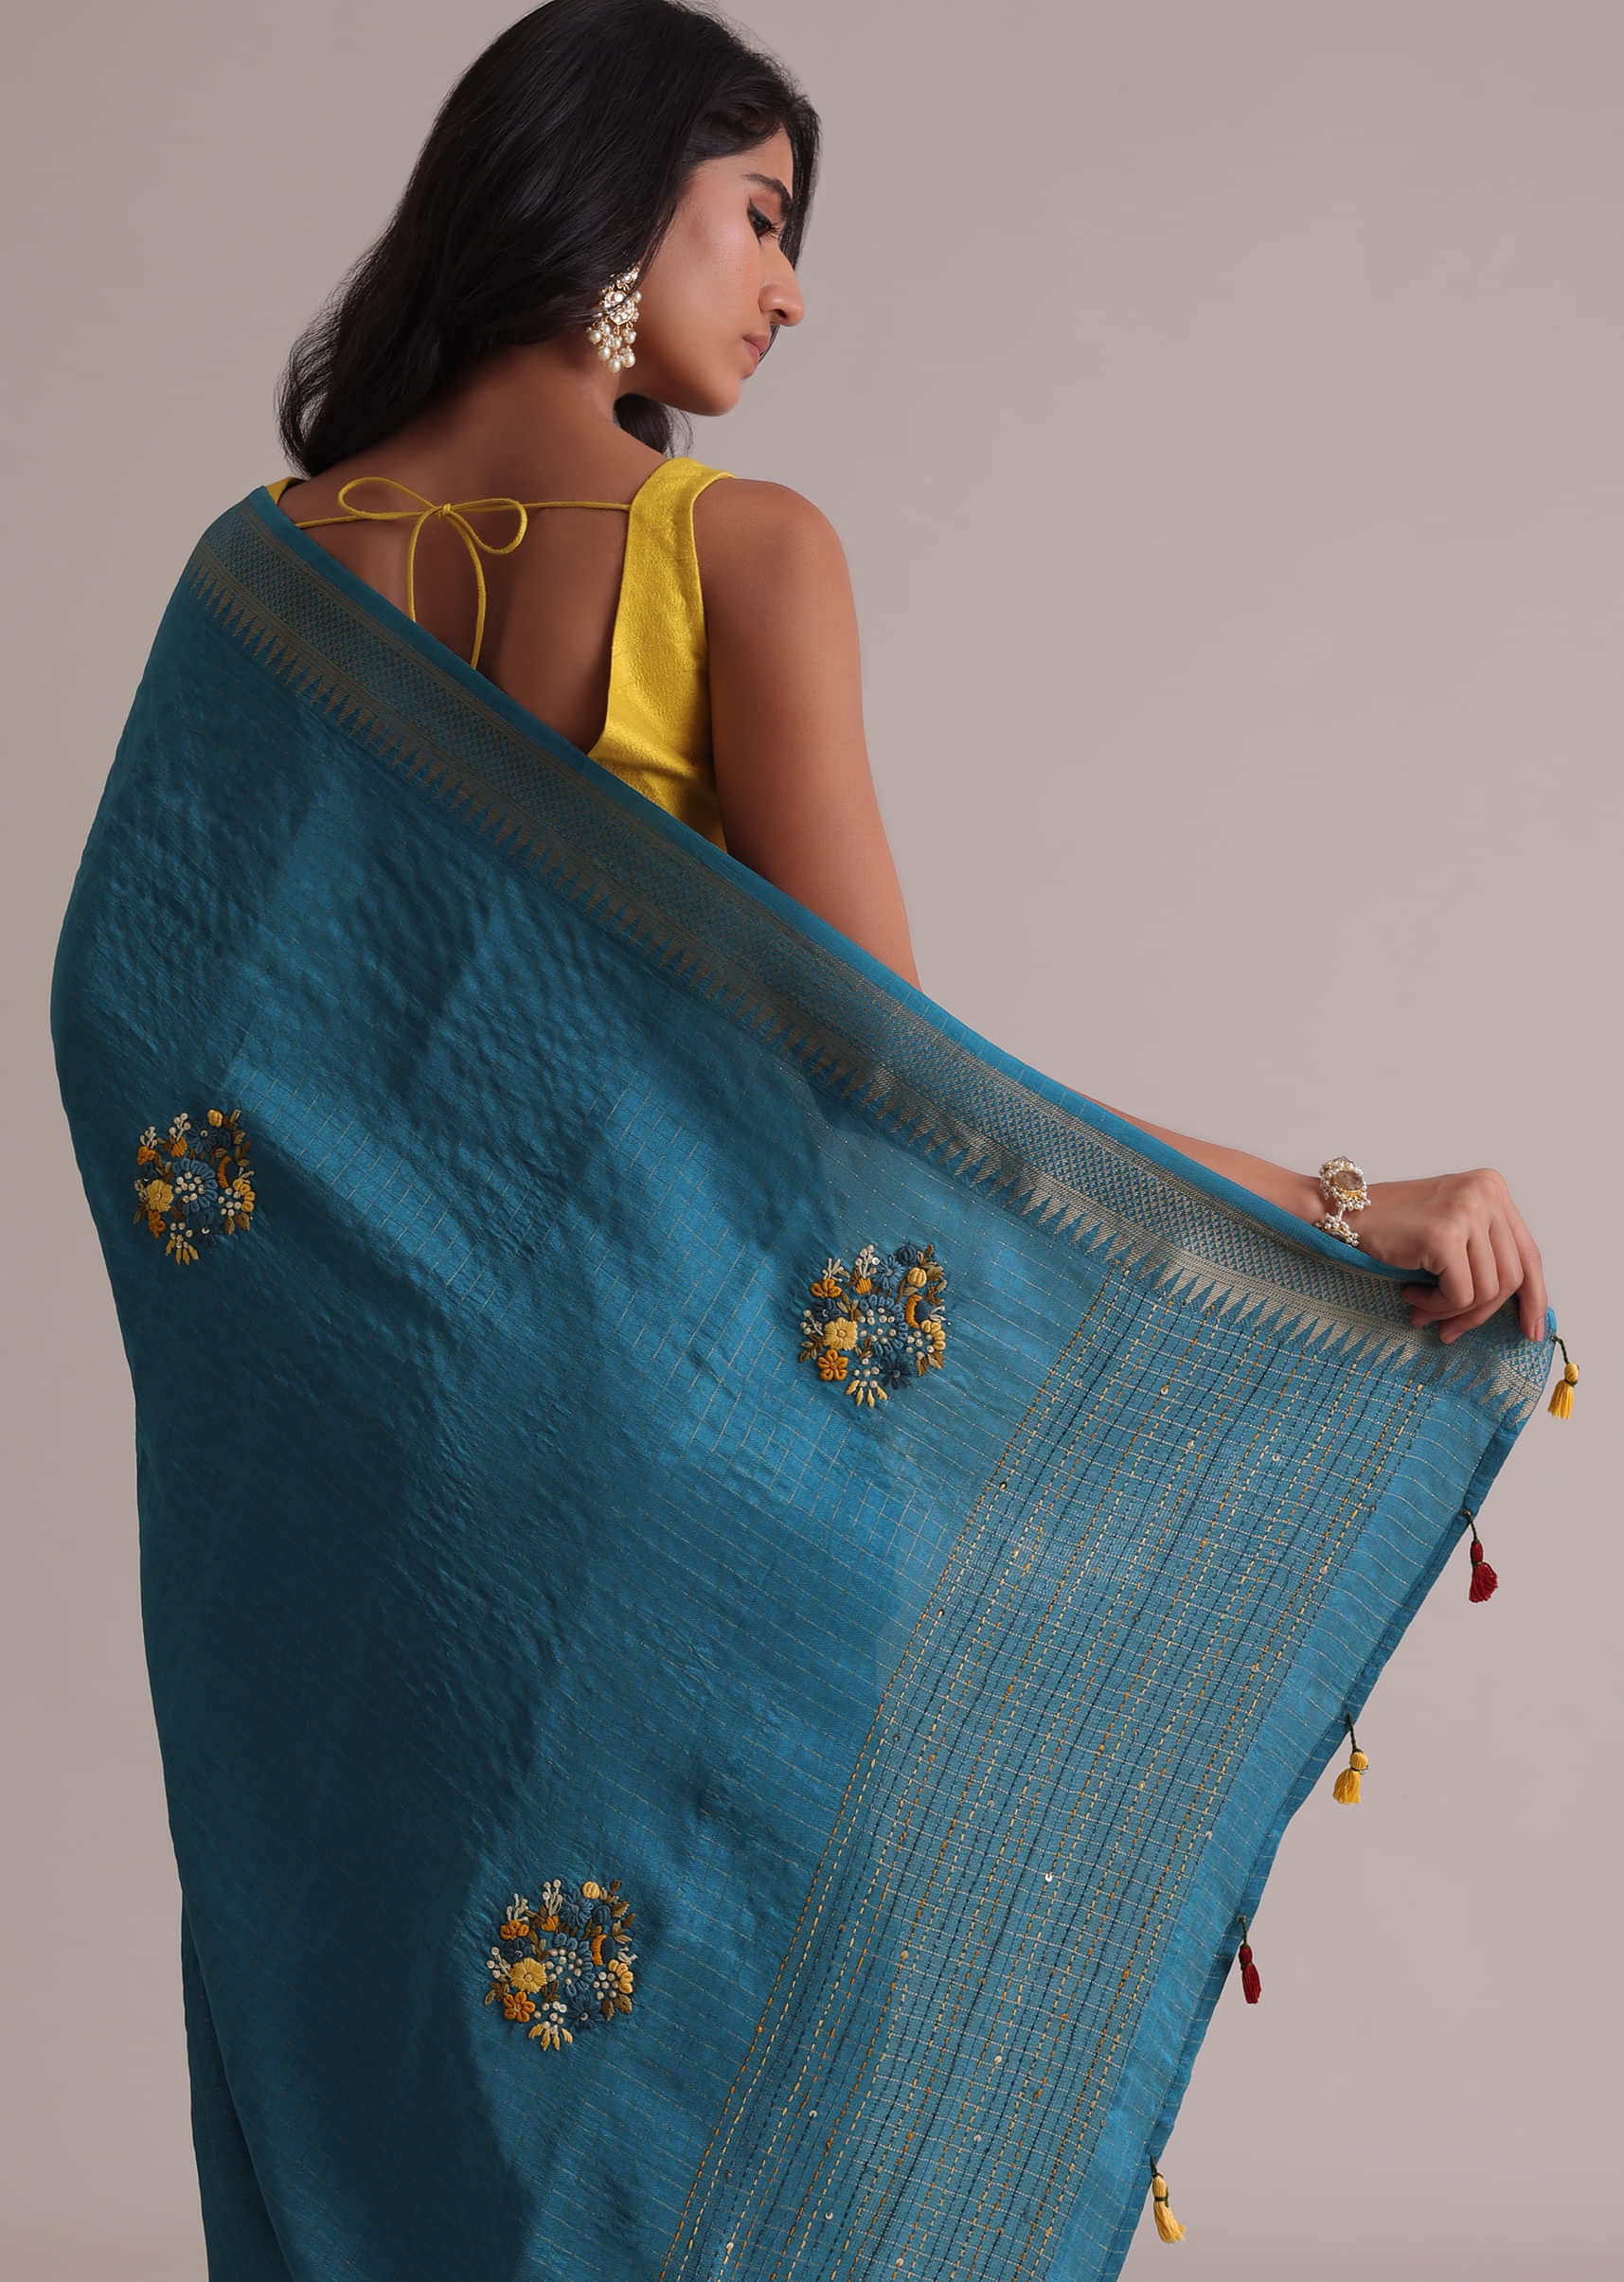 Blue Saree In Georgette Tussar With Brocade, Zari, And Resham 3D Bud Embroidery